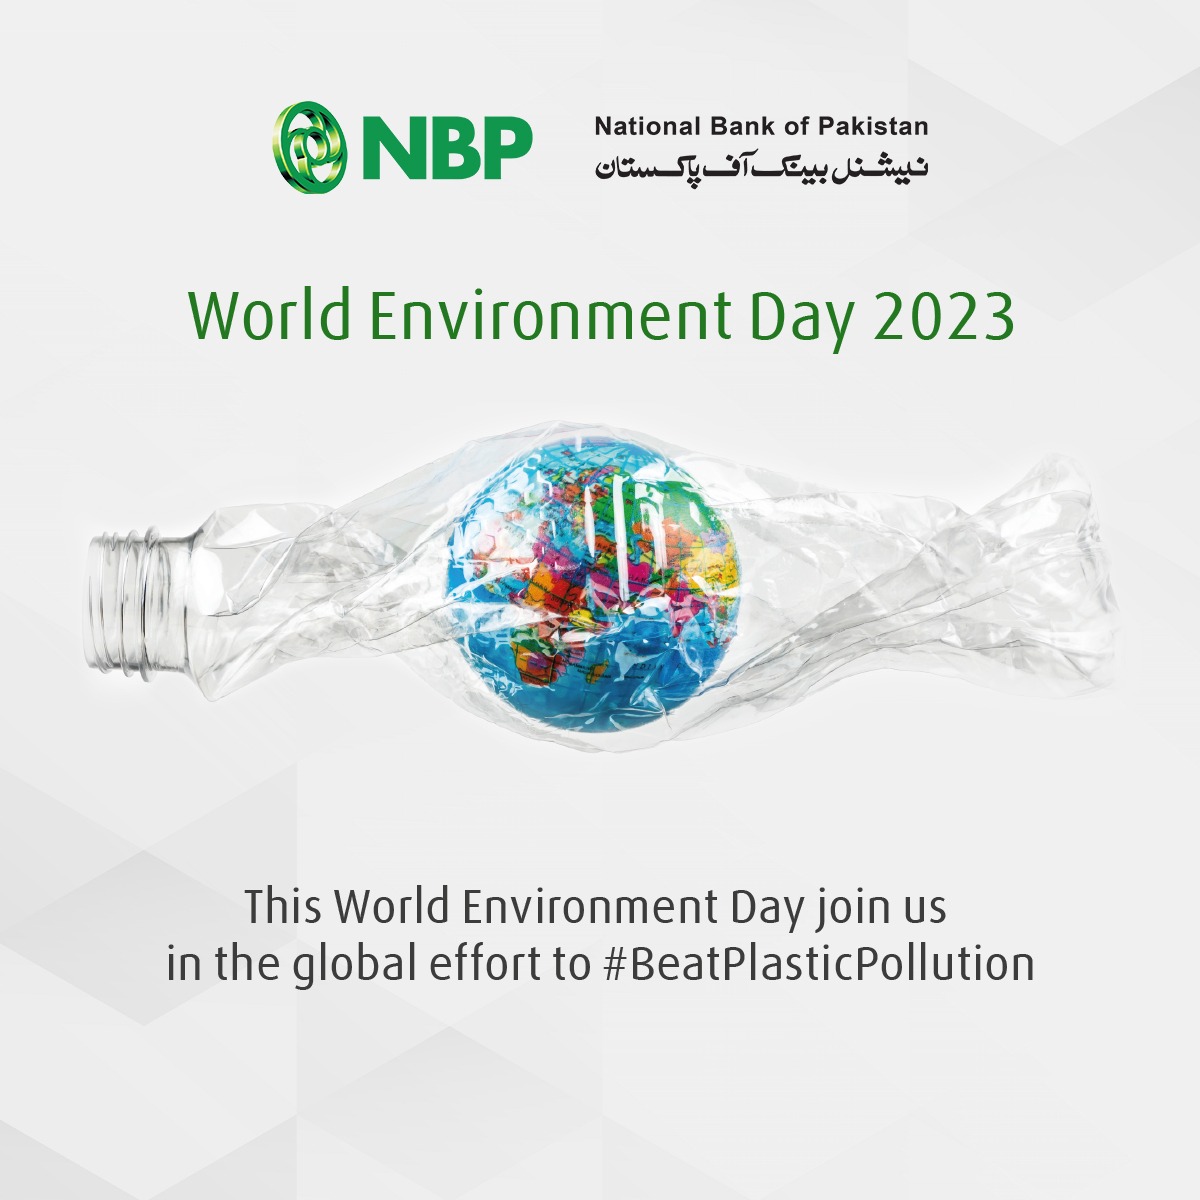 Celebrate this World Environment Day by making small changes to preserve and protect our planet, as we can beat plastic pollution together.

#NBP #NationalBankofPakistan #TheNationsBank #WorldEnvironmentDay2023 #BeatPlasticPollution #5thJune